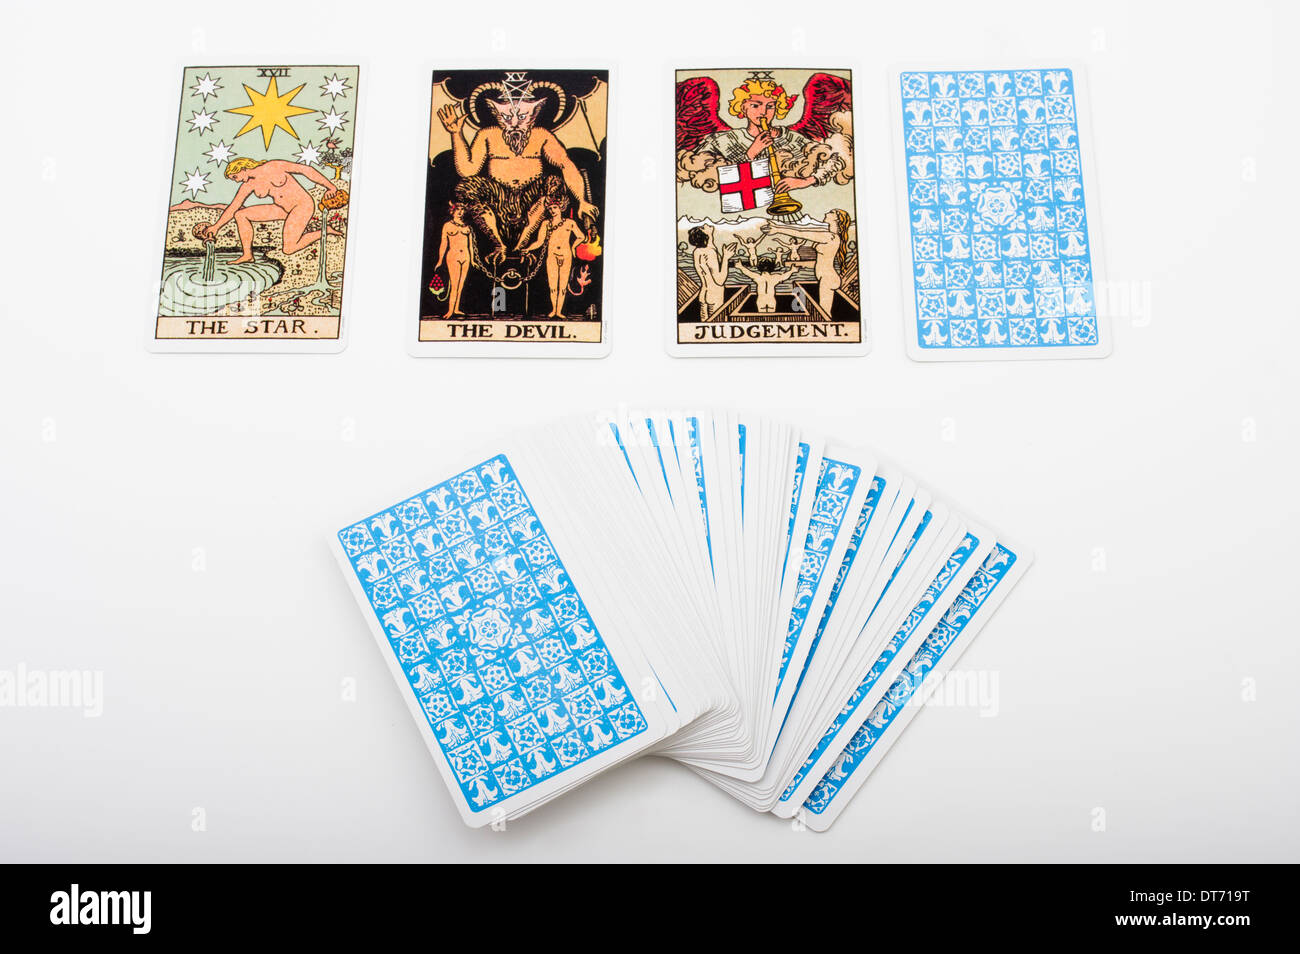 Tarot playing cards used by mystics, occultists for divination and fortune telling Stock Photo